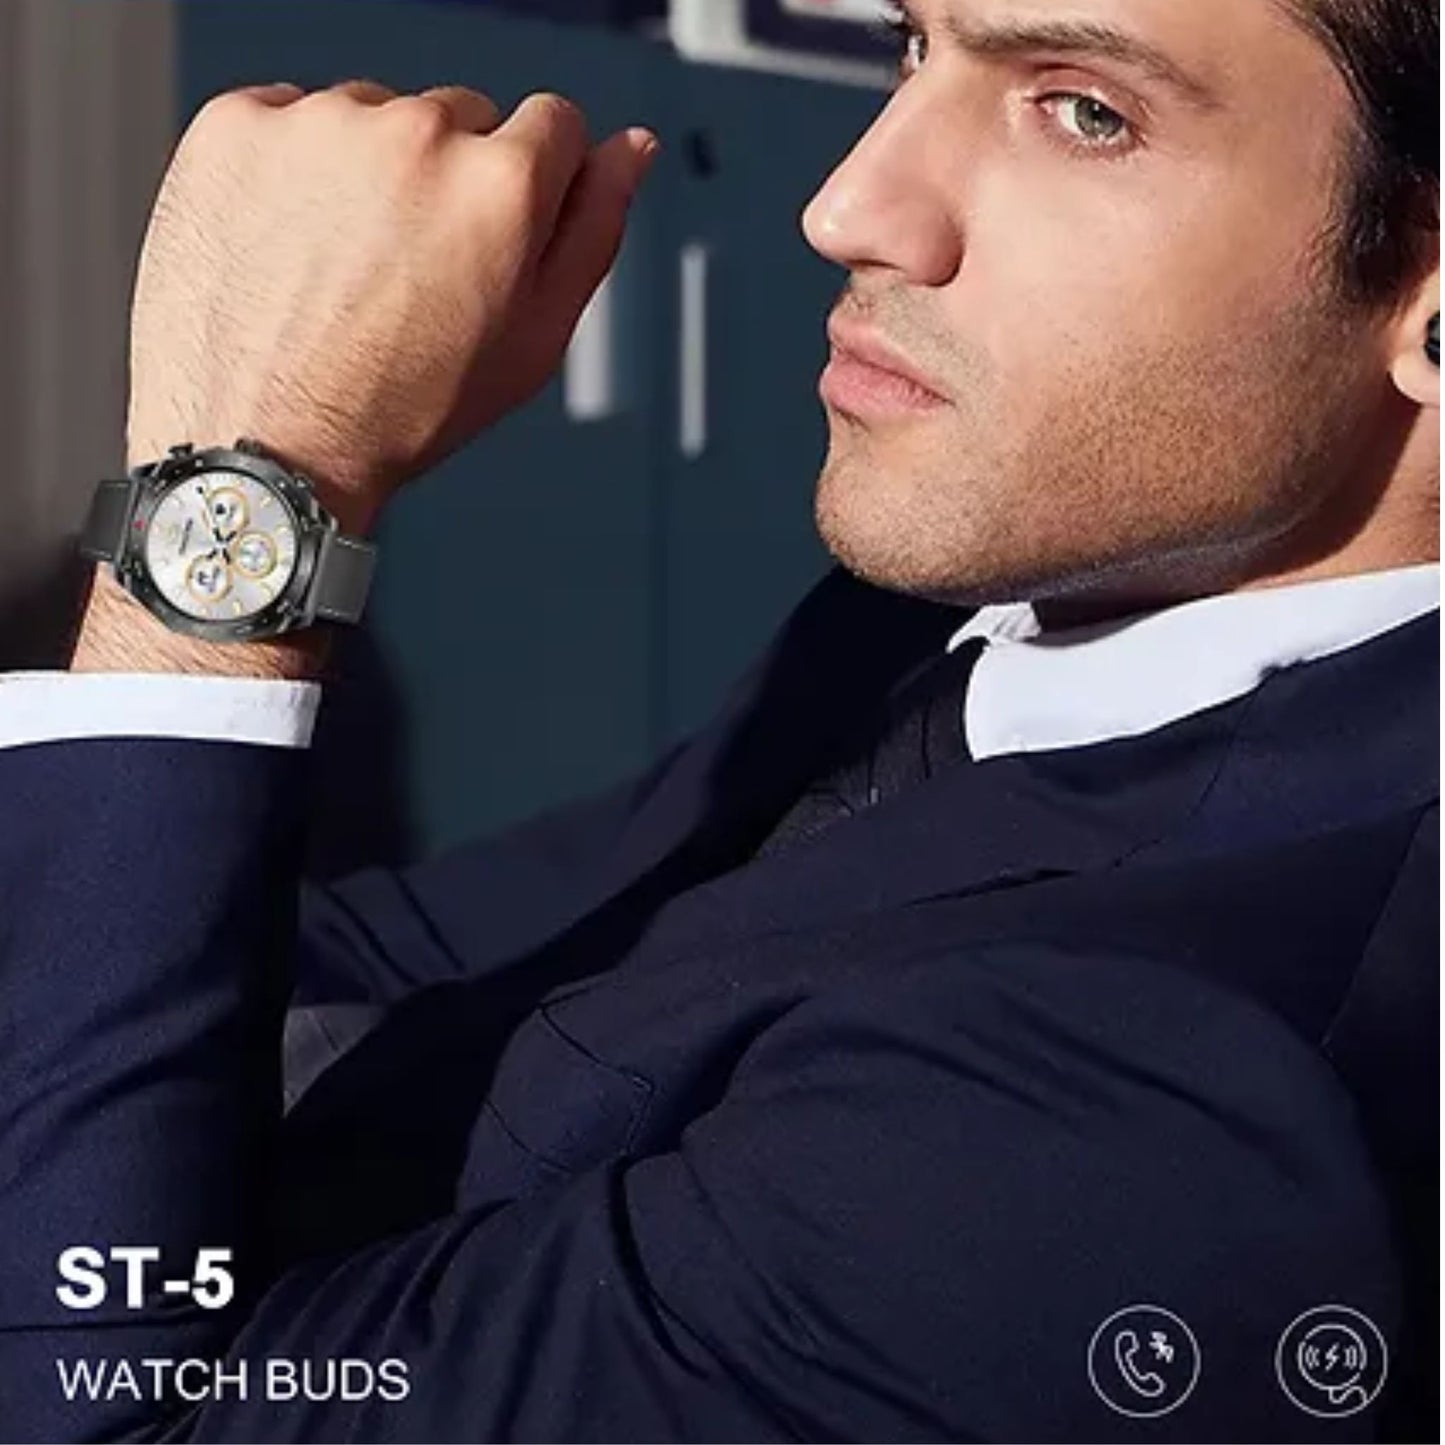 Premium ST-5 Watch Buds With Large Screen Round Shape AMOLED Display for Ladies and Gents_silver